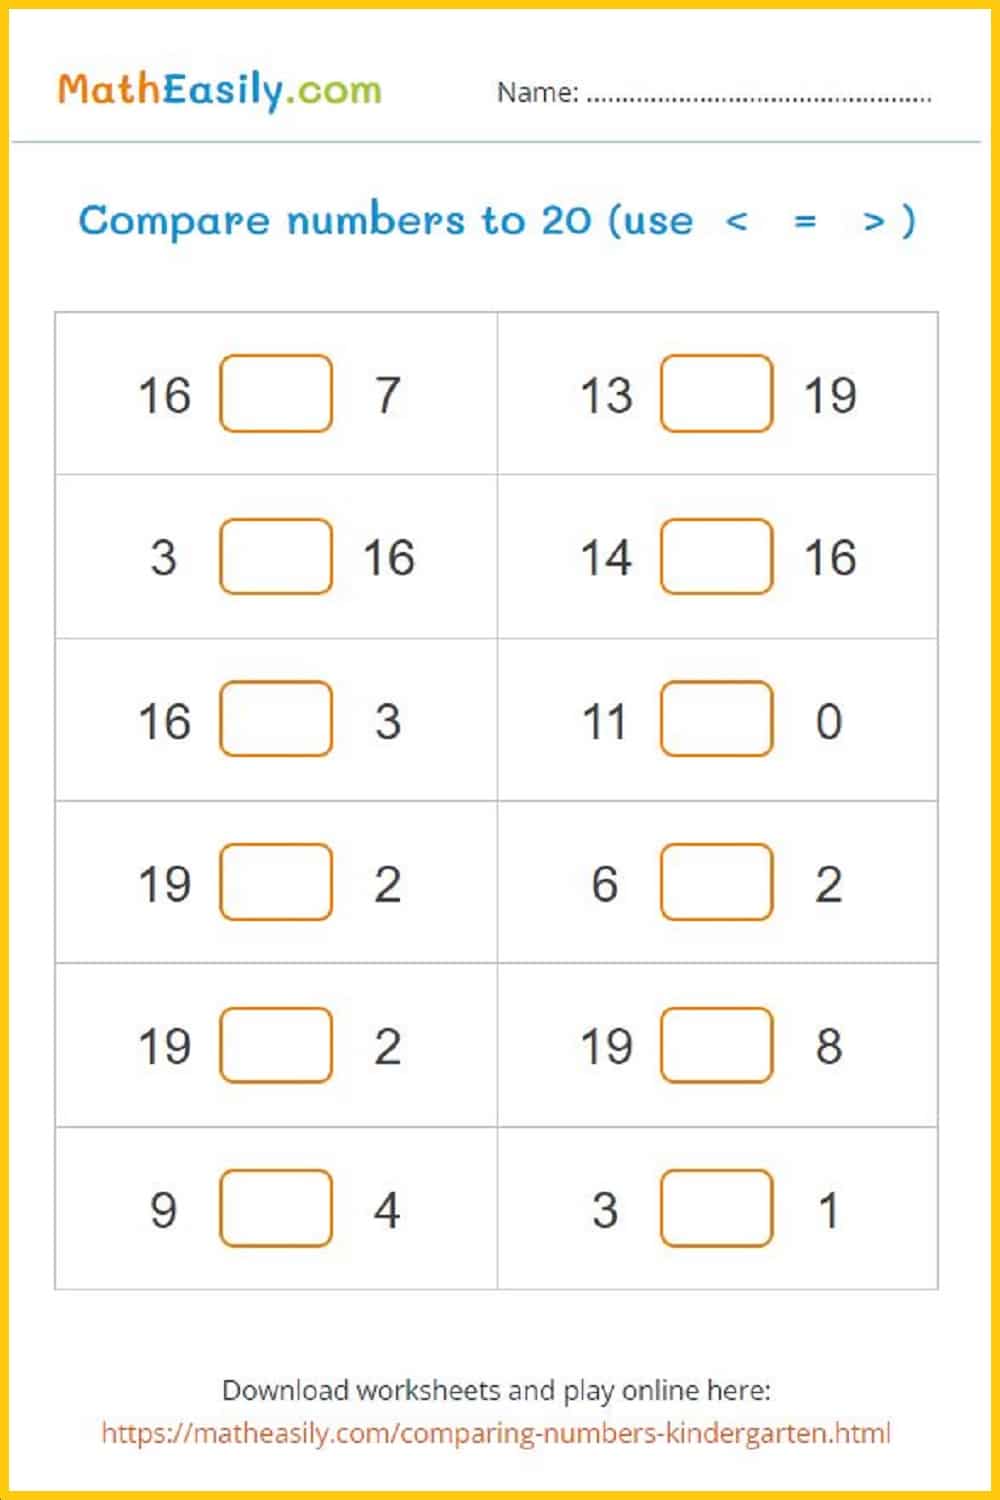 comparing numbers 1 to 20. comparing numbers worksheets for kindergarten PDF. 
math comparison worksheet for UKG. comparing numbers kindergarten worksheets. bigger smaller number worksheets kindergarten. 
comparing numbers practice.